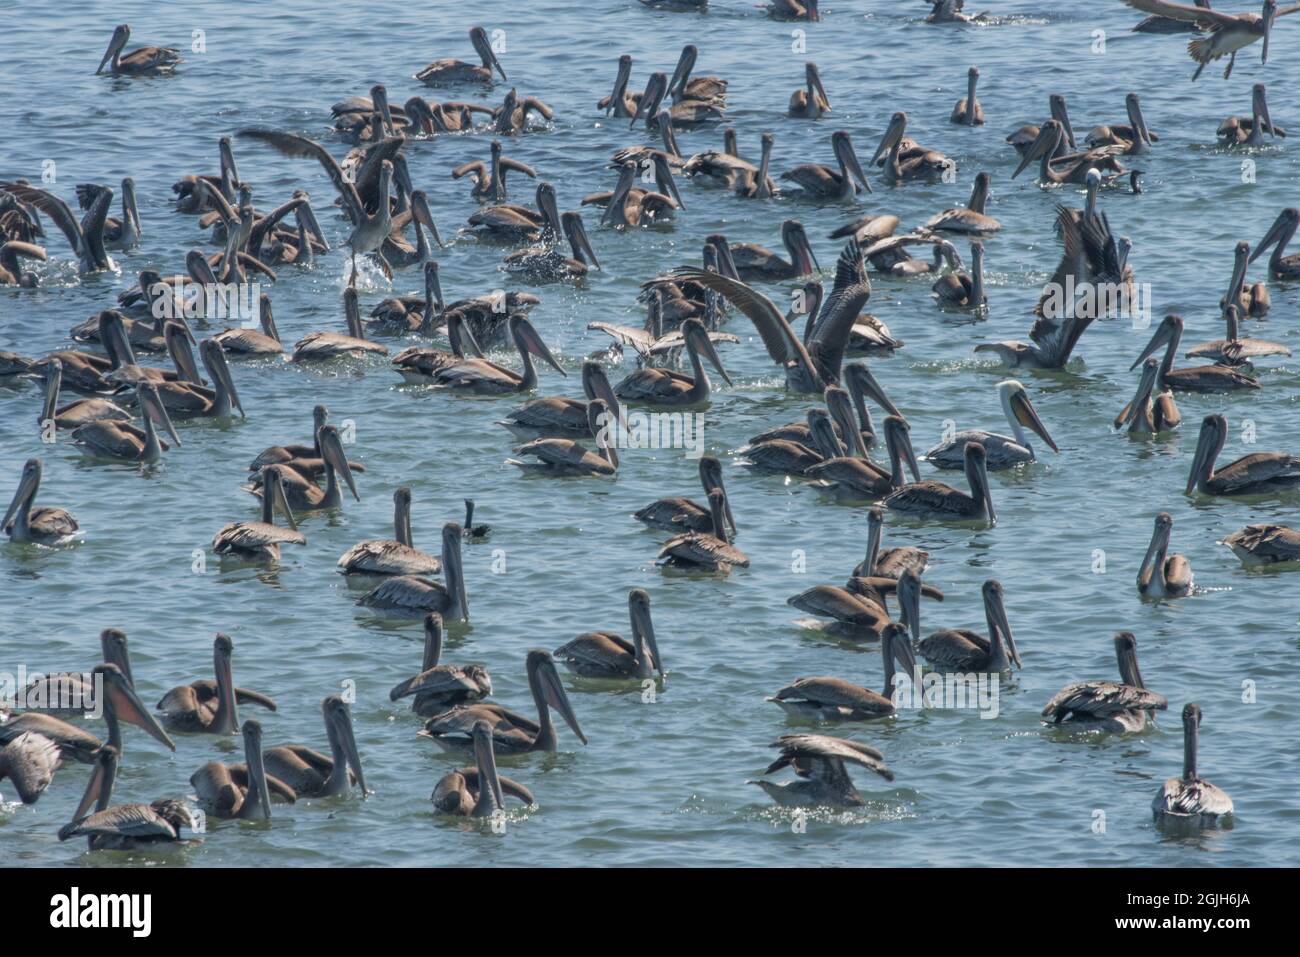 A flock of brown pelicans (Pelecanus occidentalis), the marine birds are floating on the water off the West coast of California in the Pacific ocean. Stock Photo